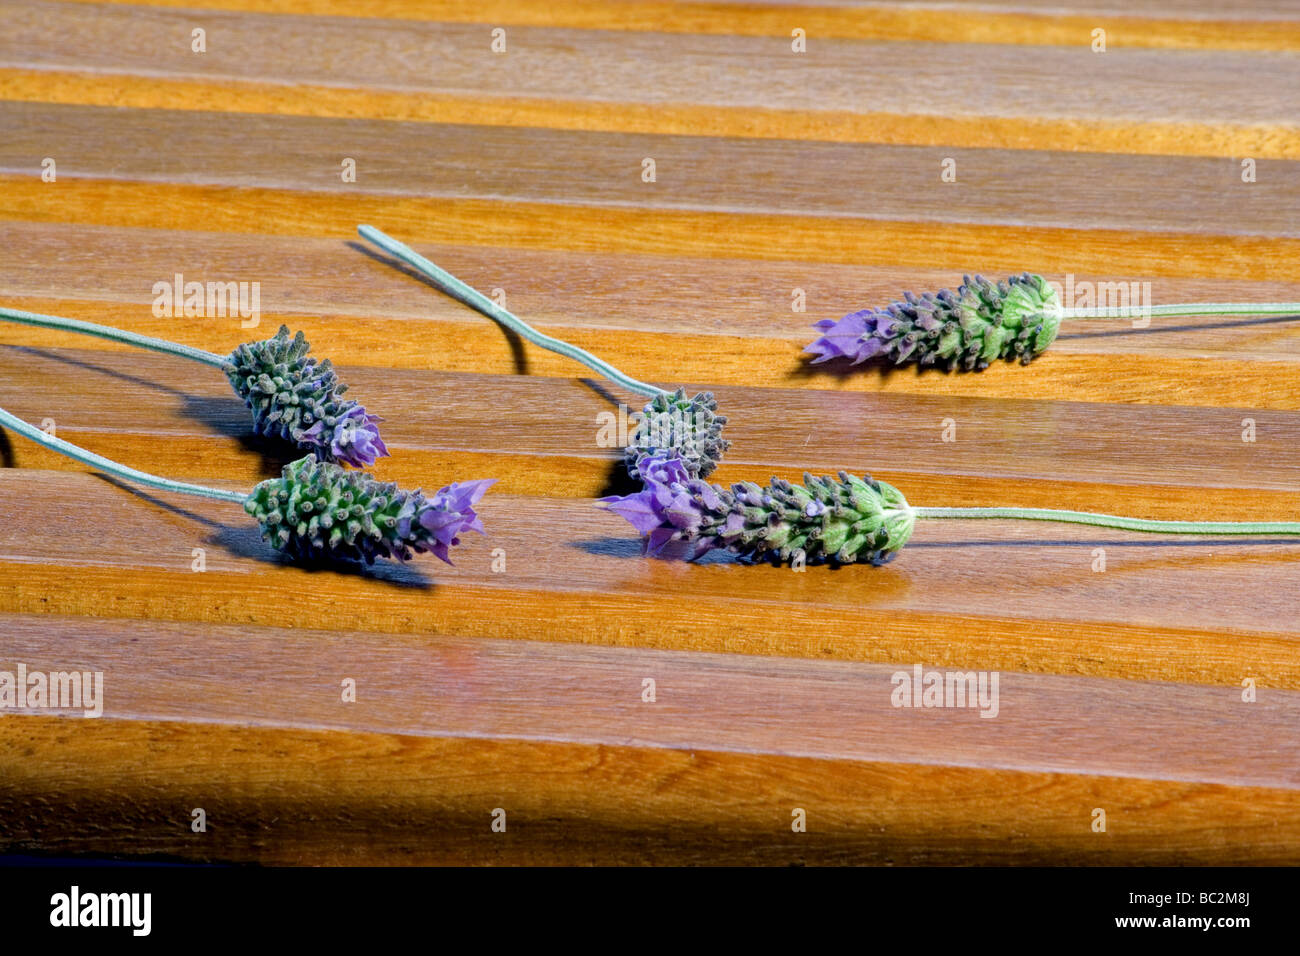 Close-up of lavender flowers on wooden deck Stock Photo